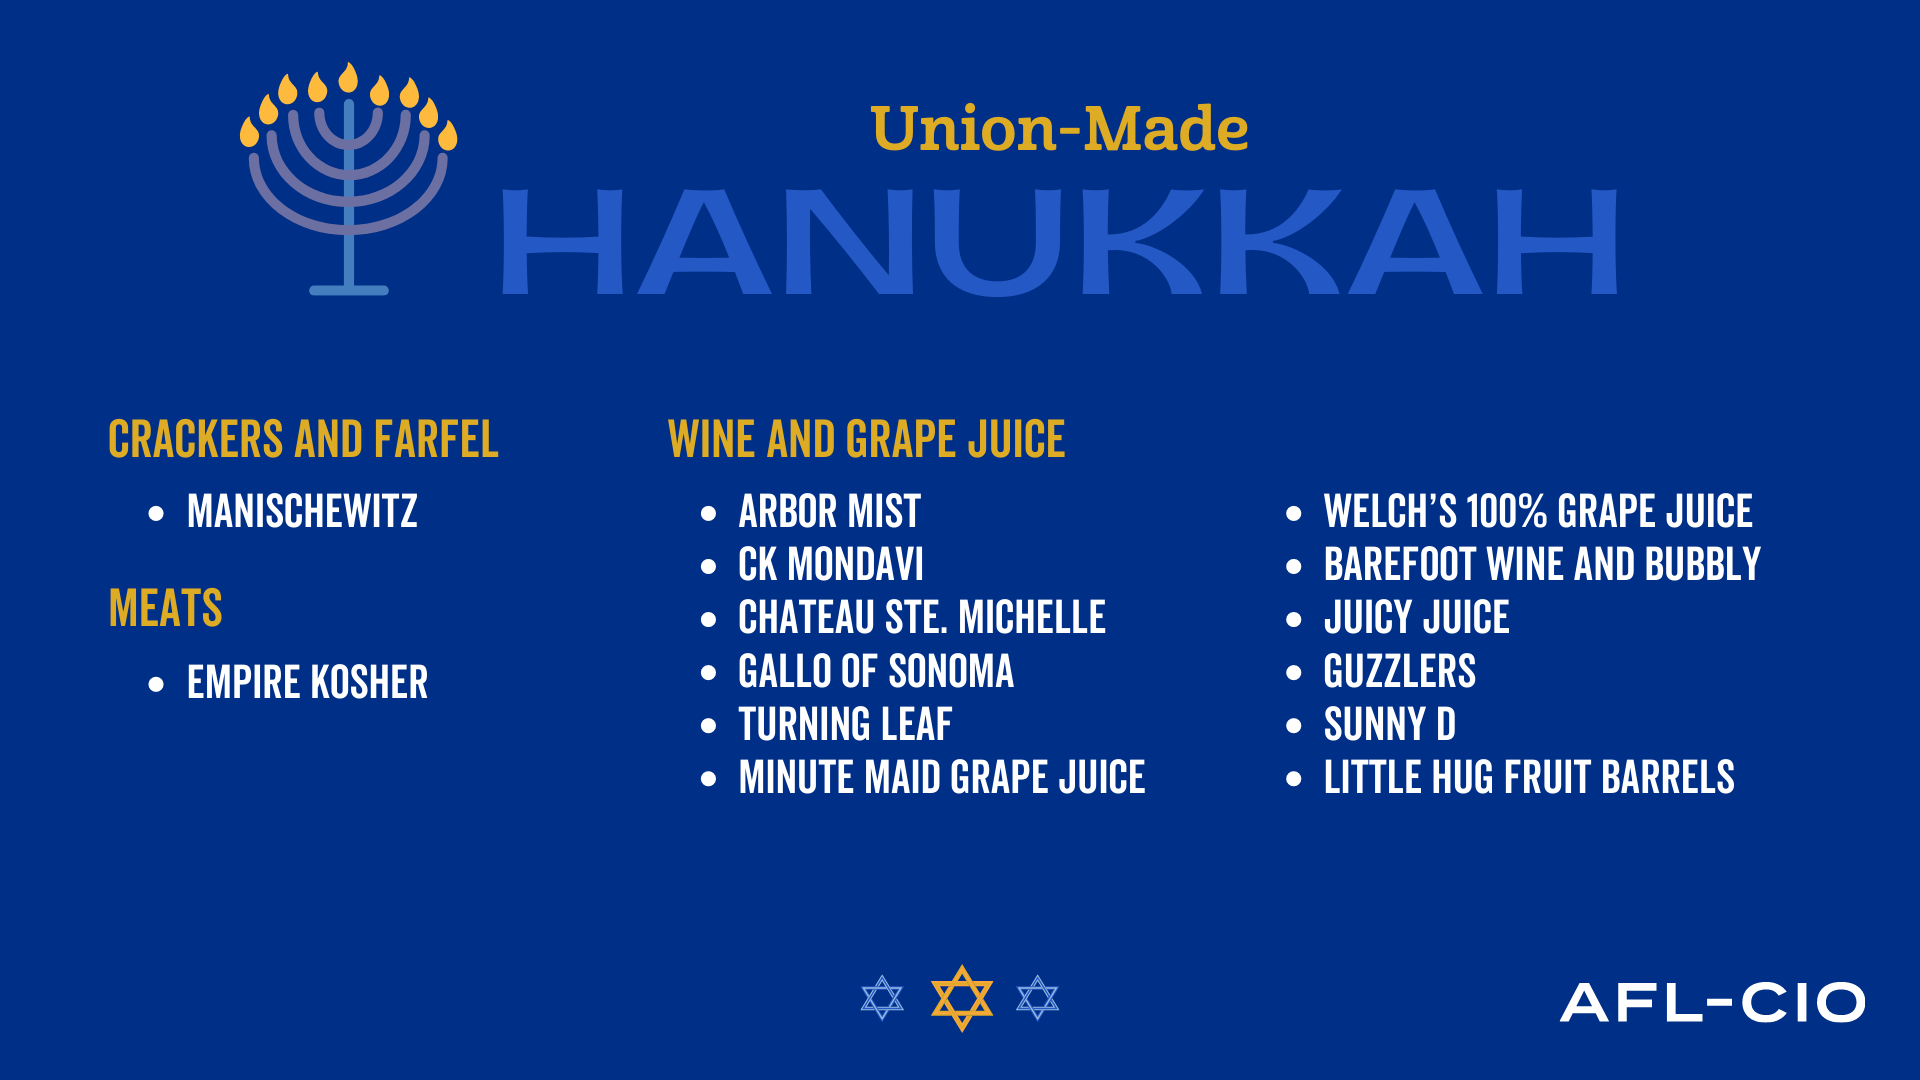 Union-Made in America Hannukah 2022